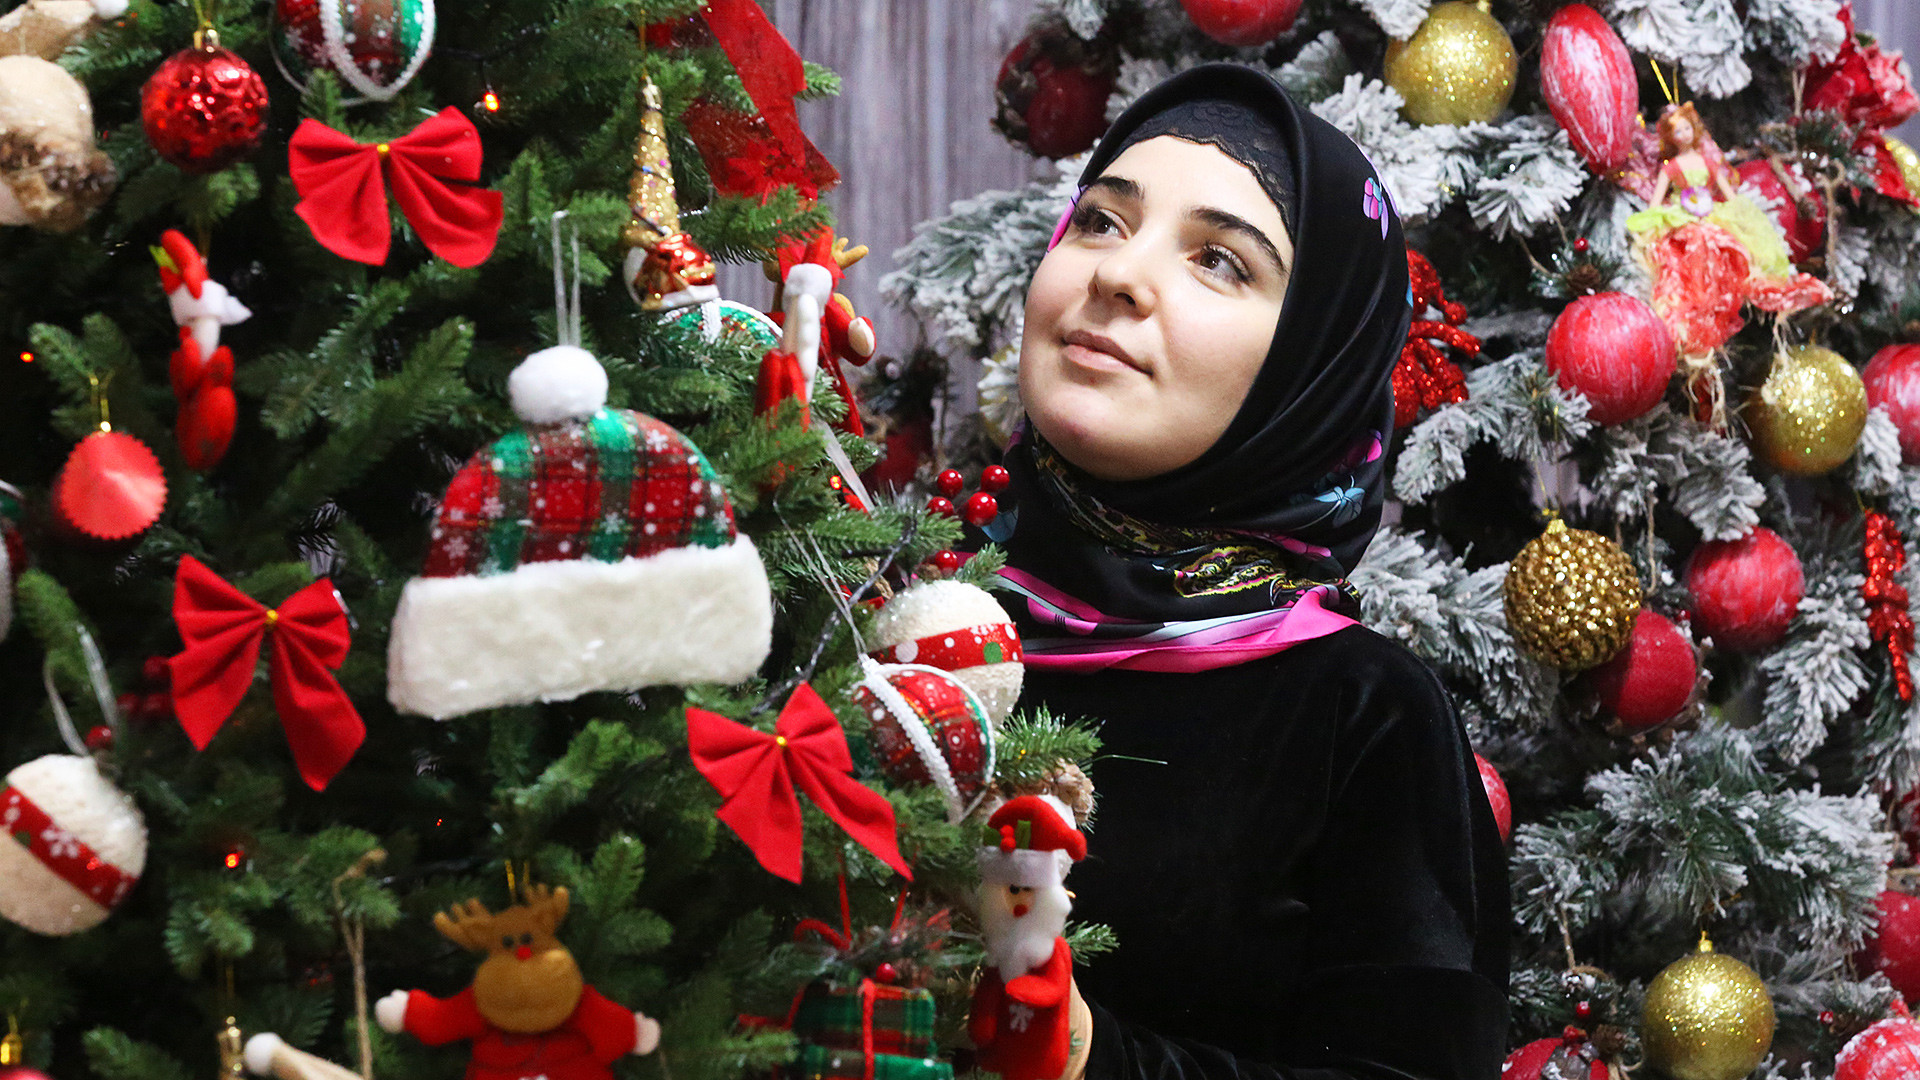  A Muslim woman shopping for New Year ornaments in Grozny.